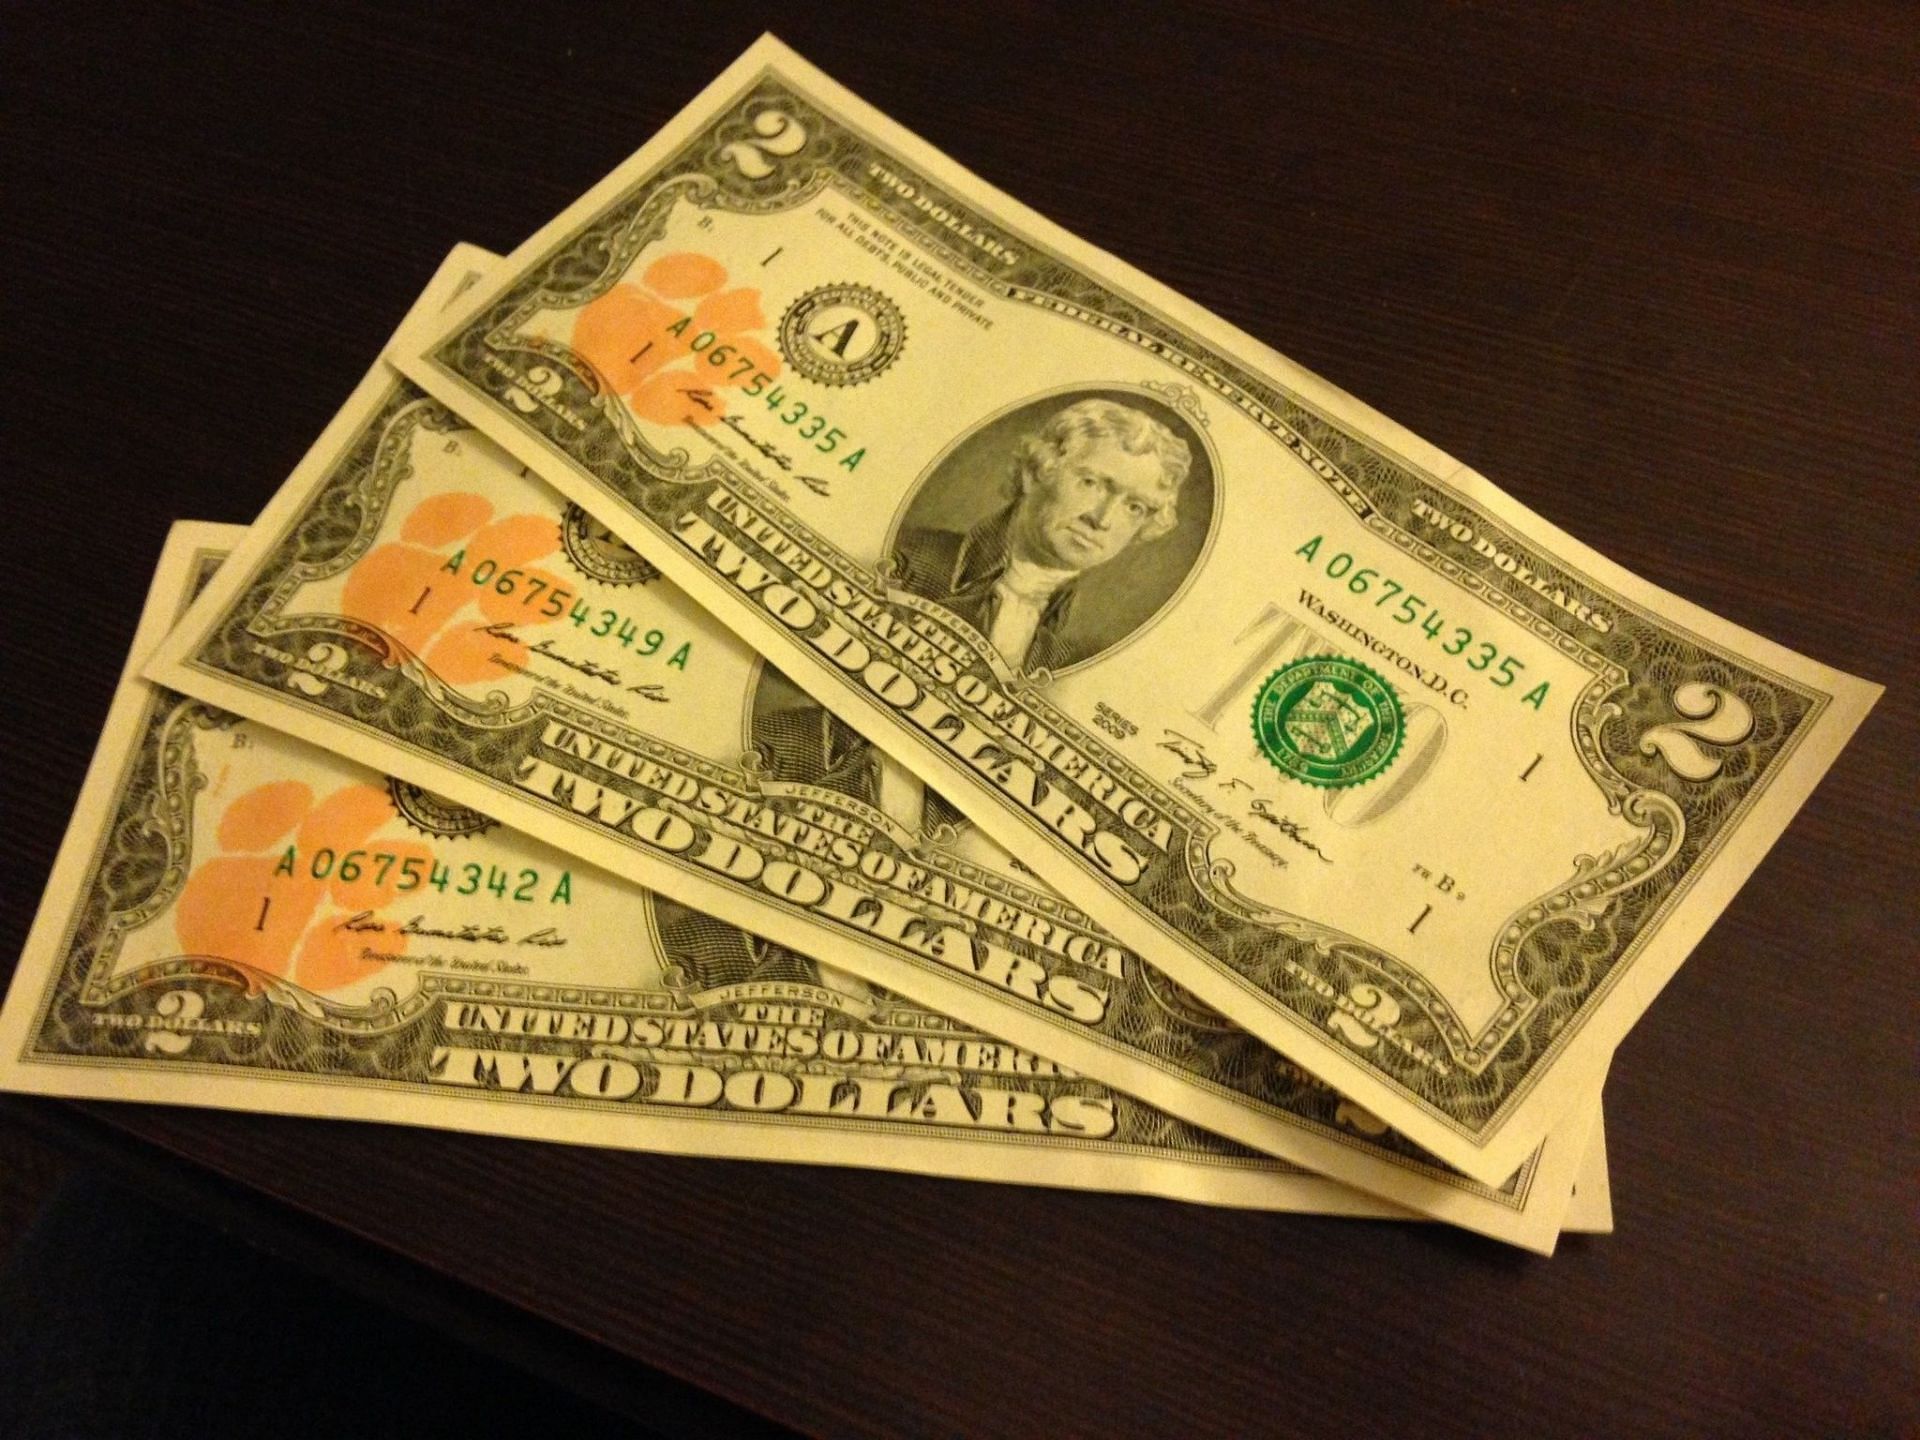 Clemson Tiger Paw $2 bills - where did the tradition come from?